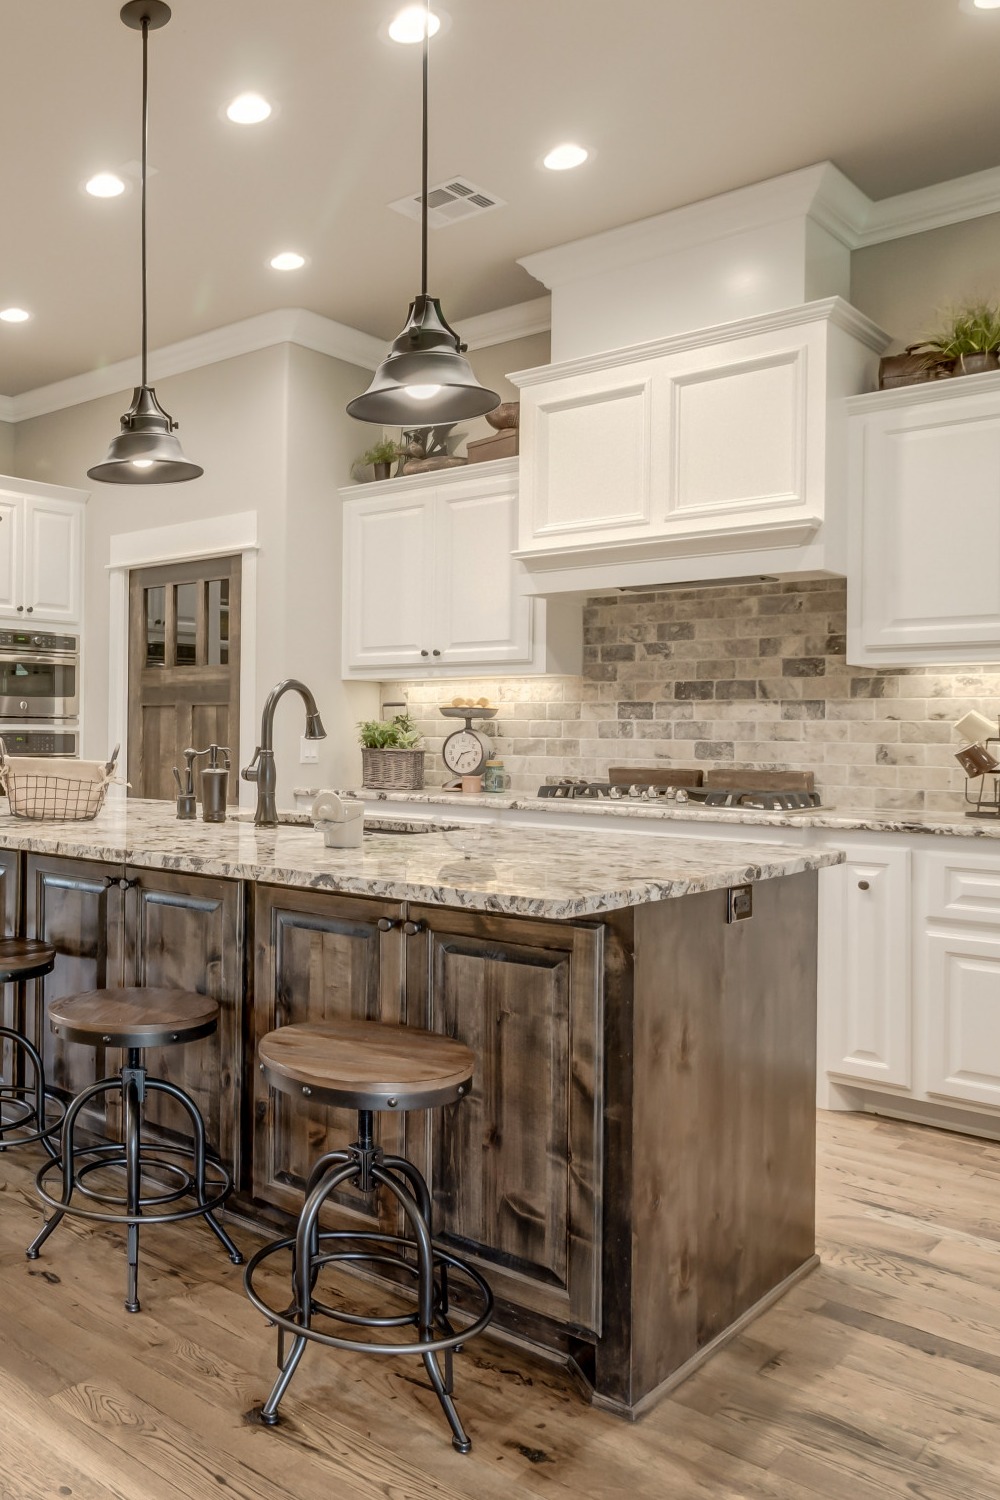 White Brick Backsplash White Cabinets Granite Countertops Wood Accents Rustic Charm Wooden Hood Modern Industrial Look Kitchen Style